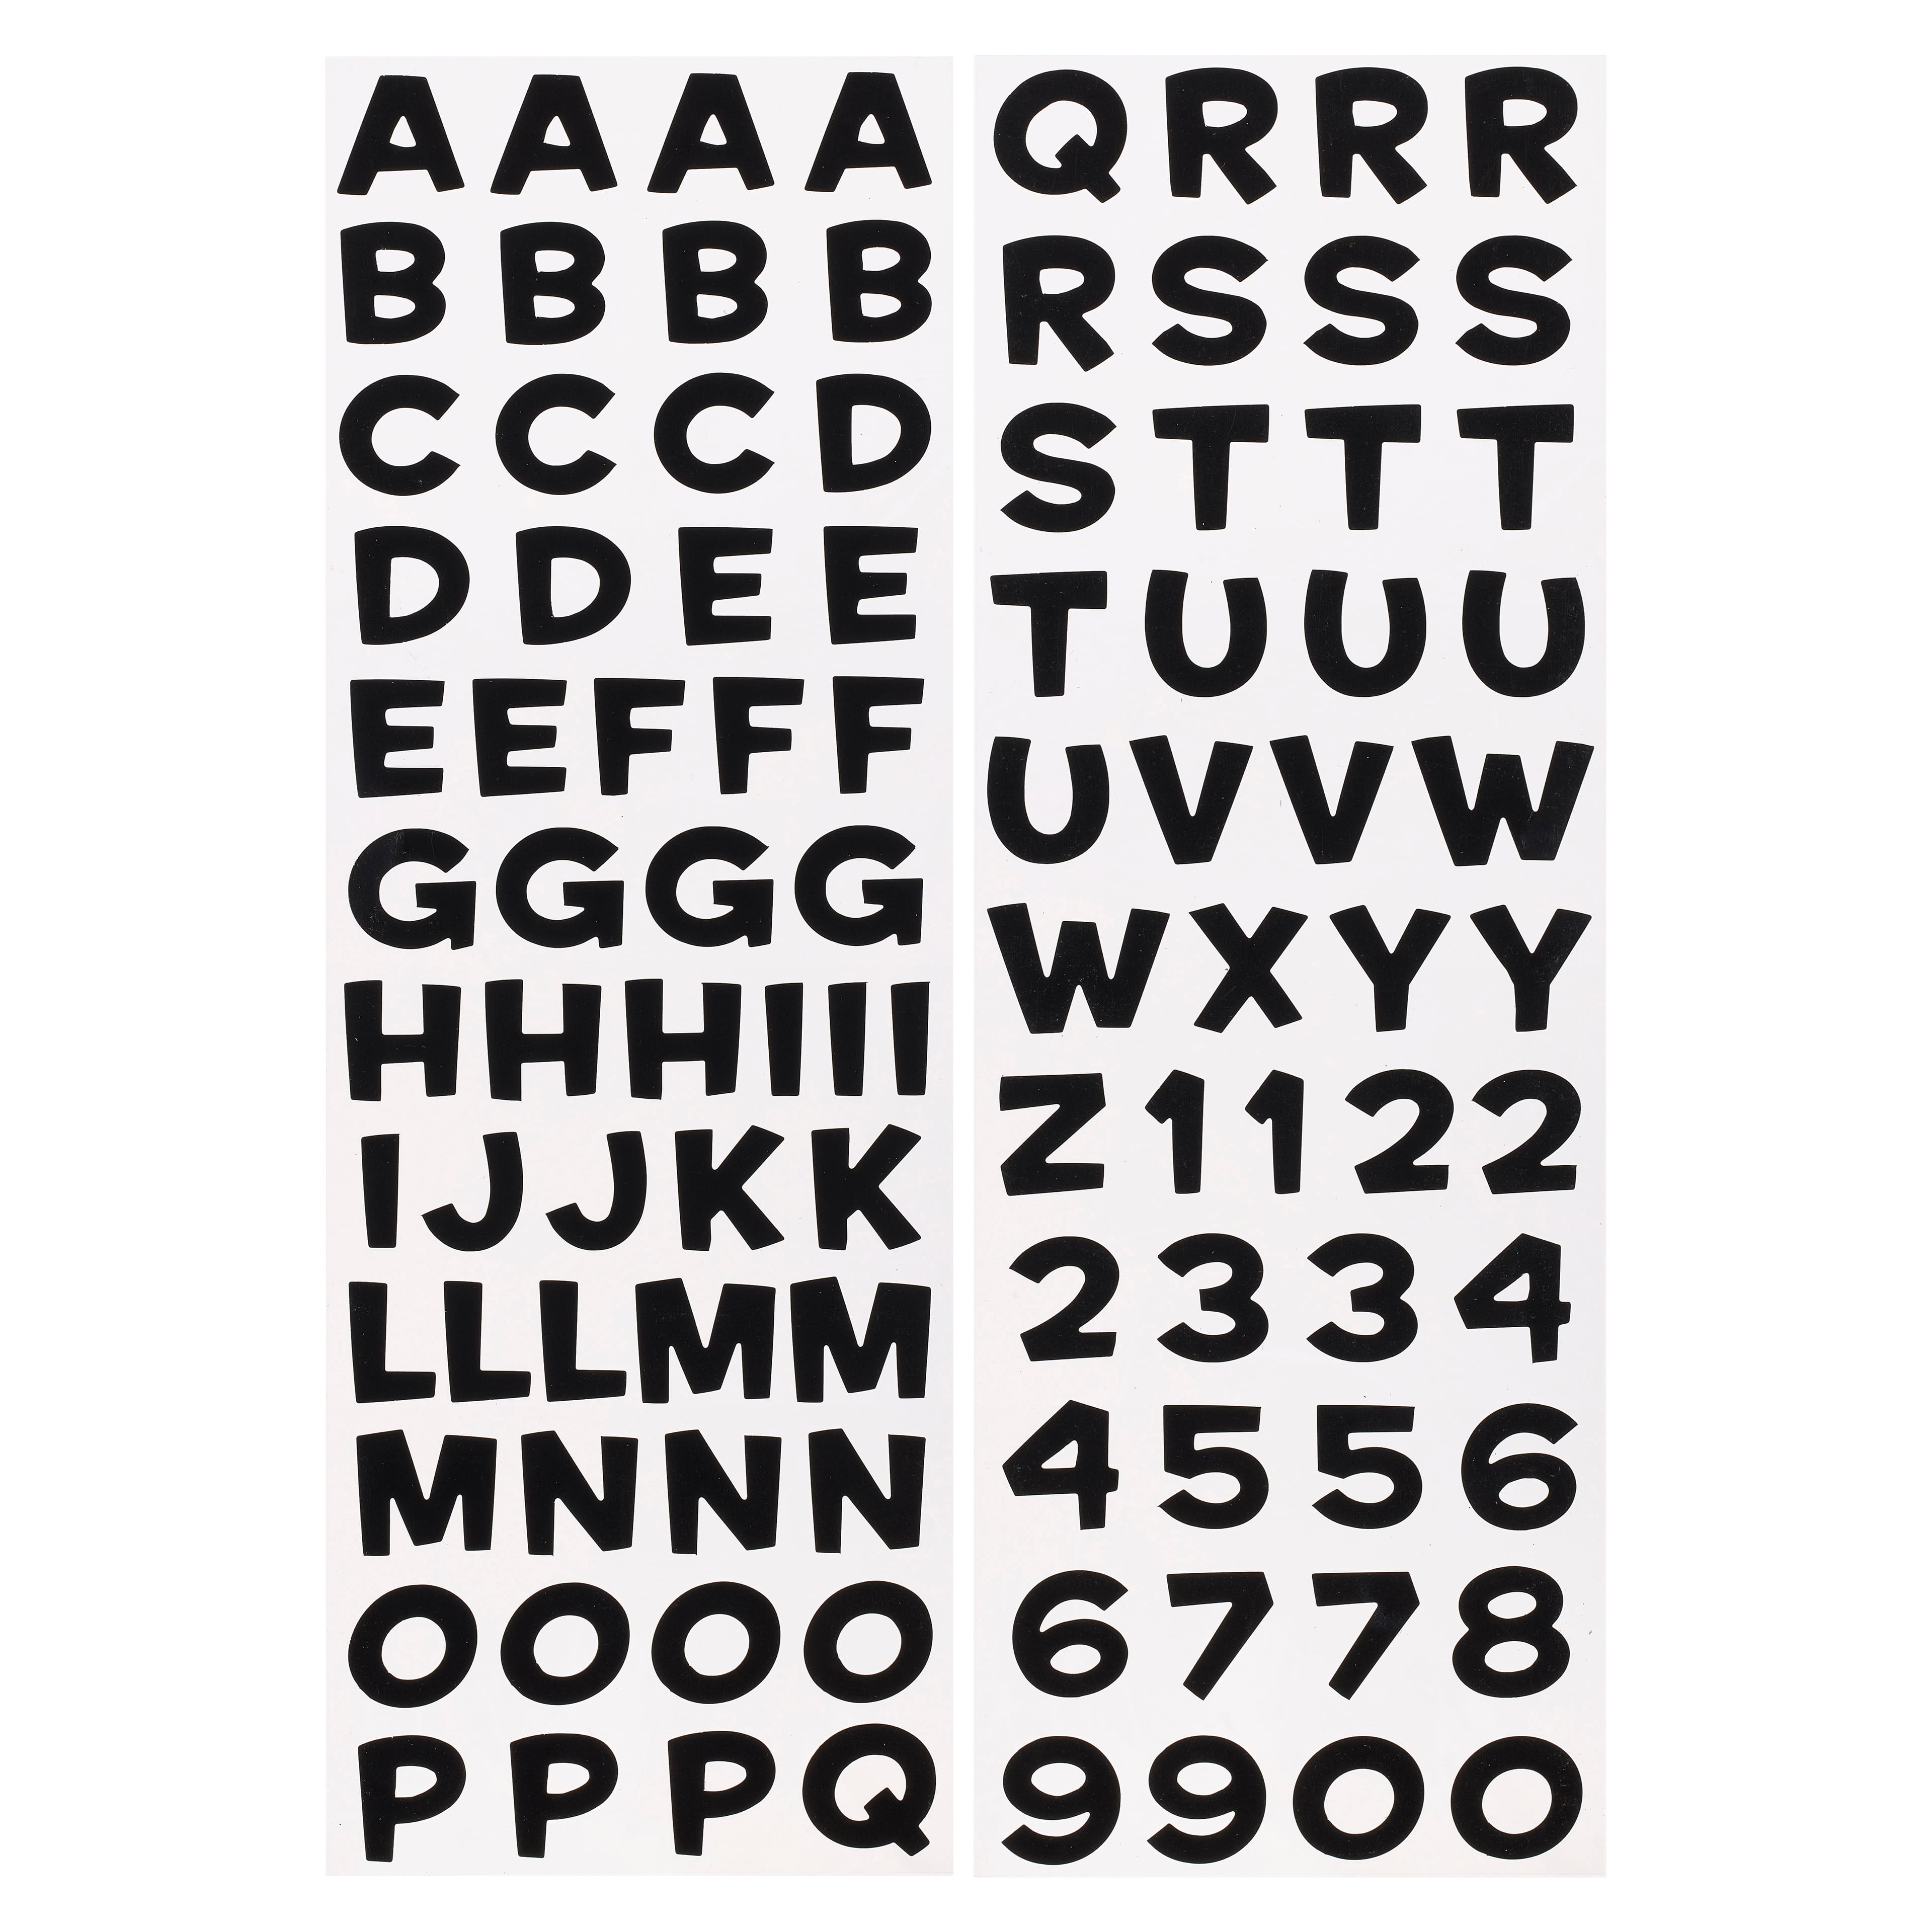 Recollections™ Alphabet Stickers, Value Pack